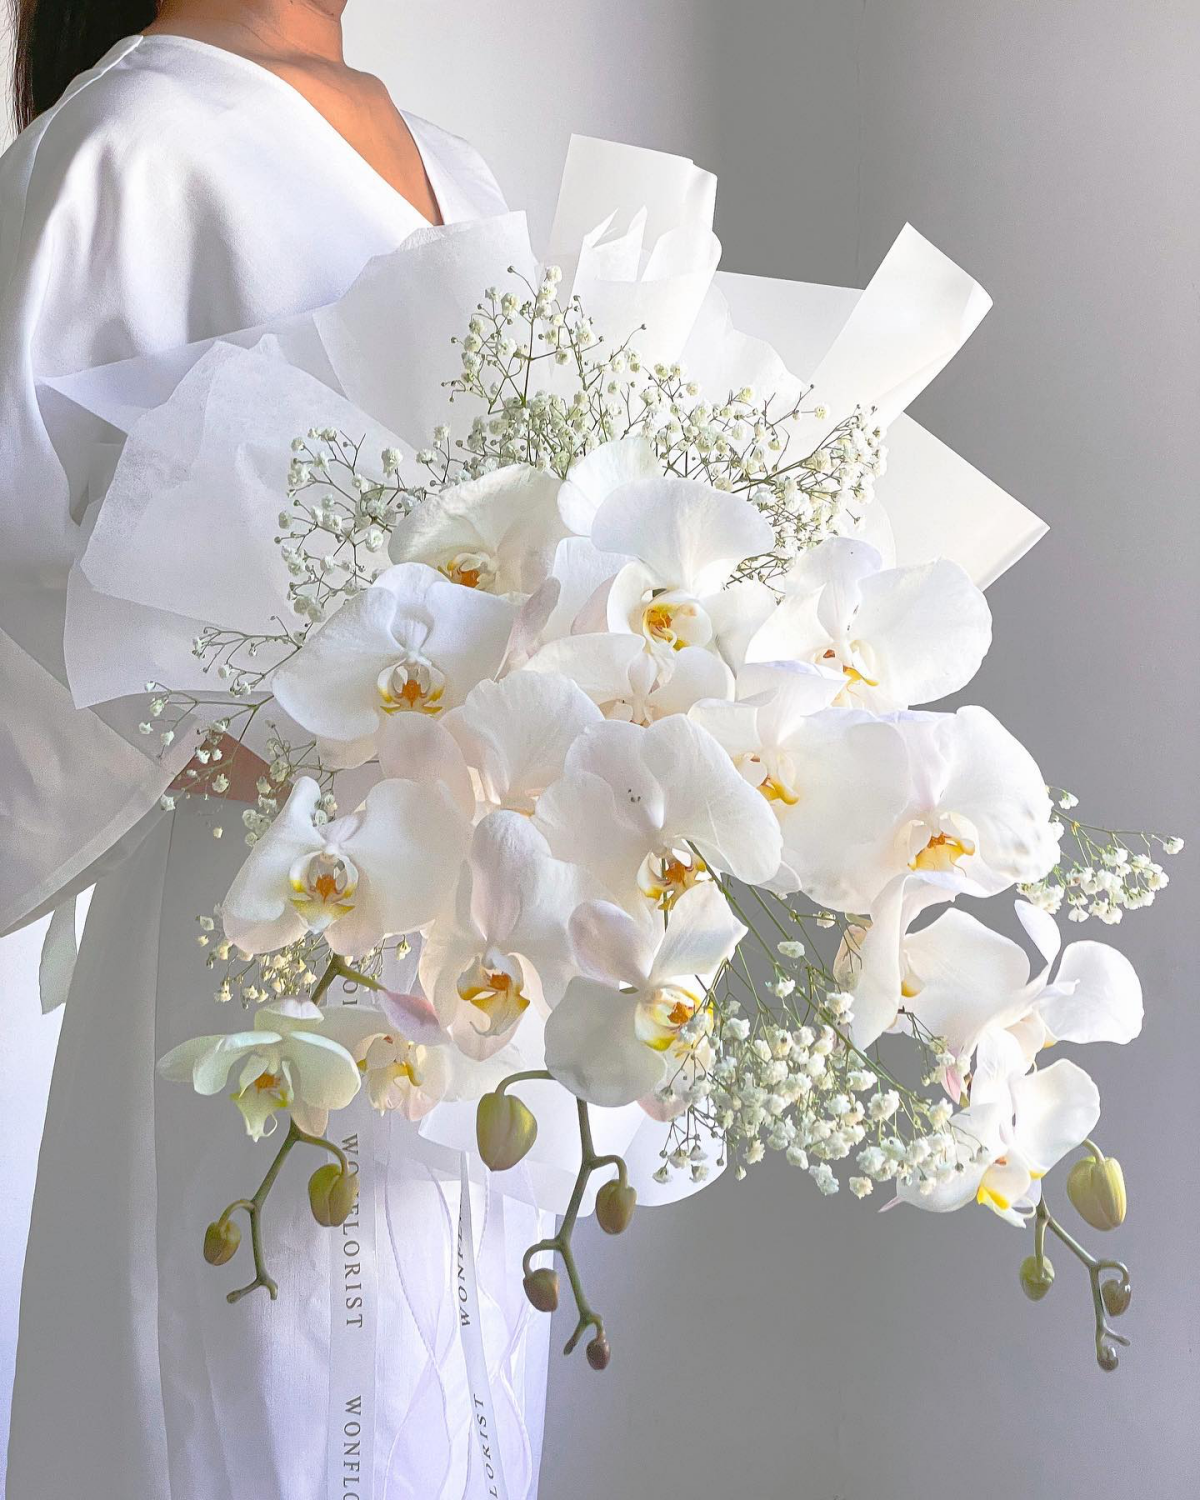 10 Beautiful Orchid Wedding Bouquet Ideas for a Timeless Look